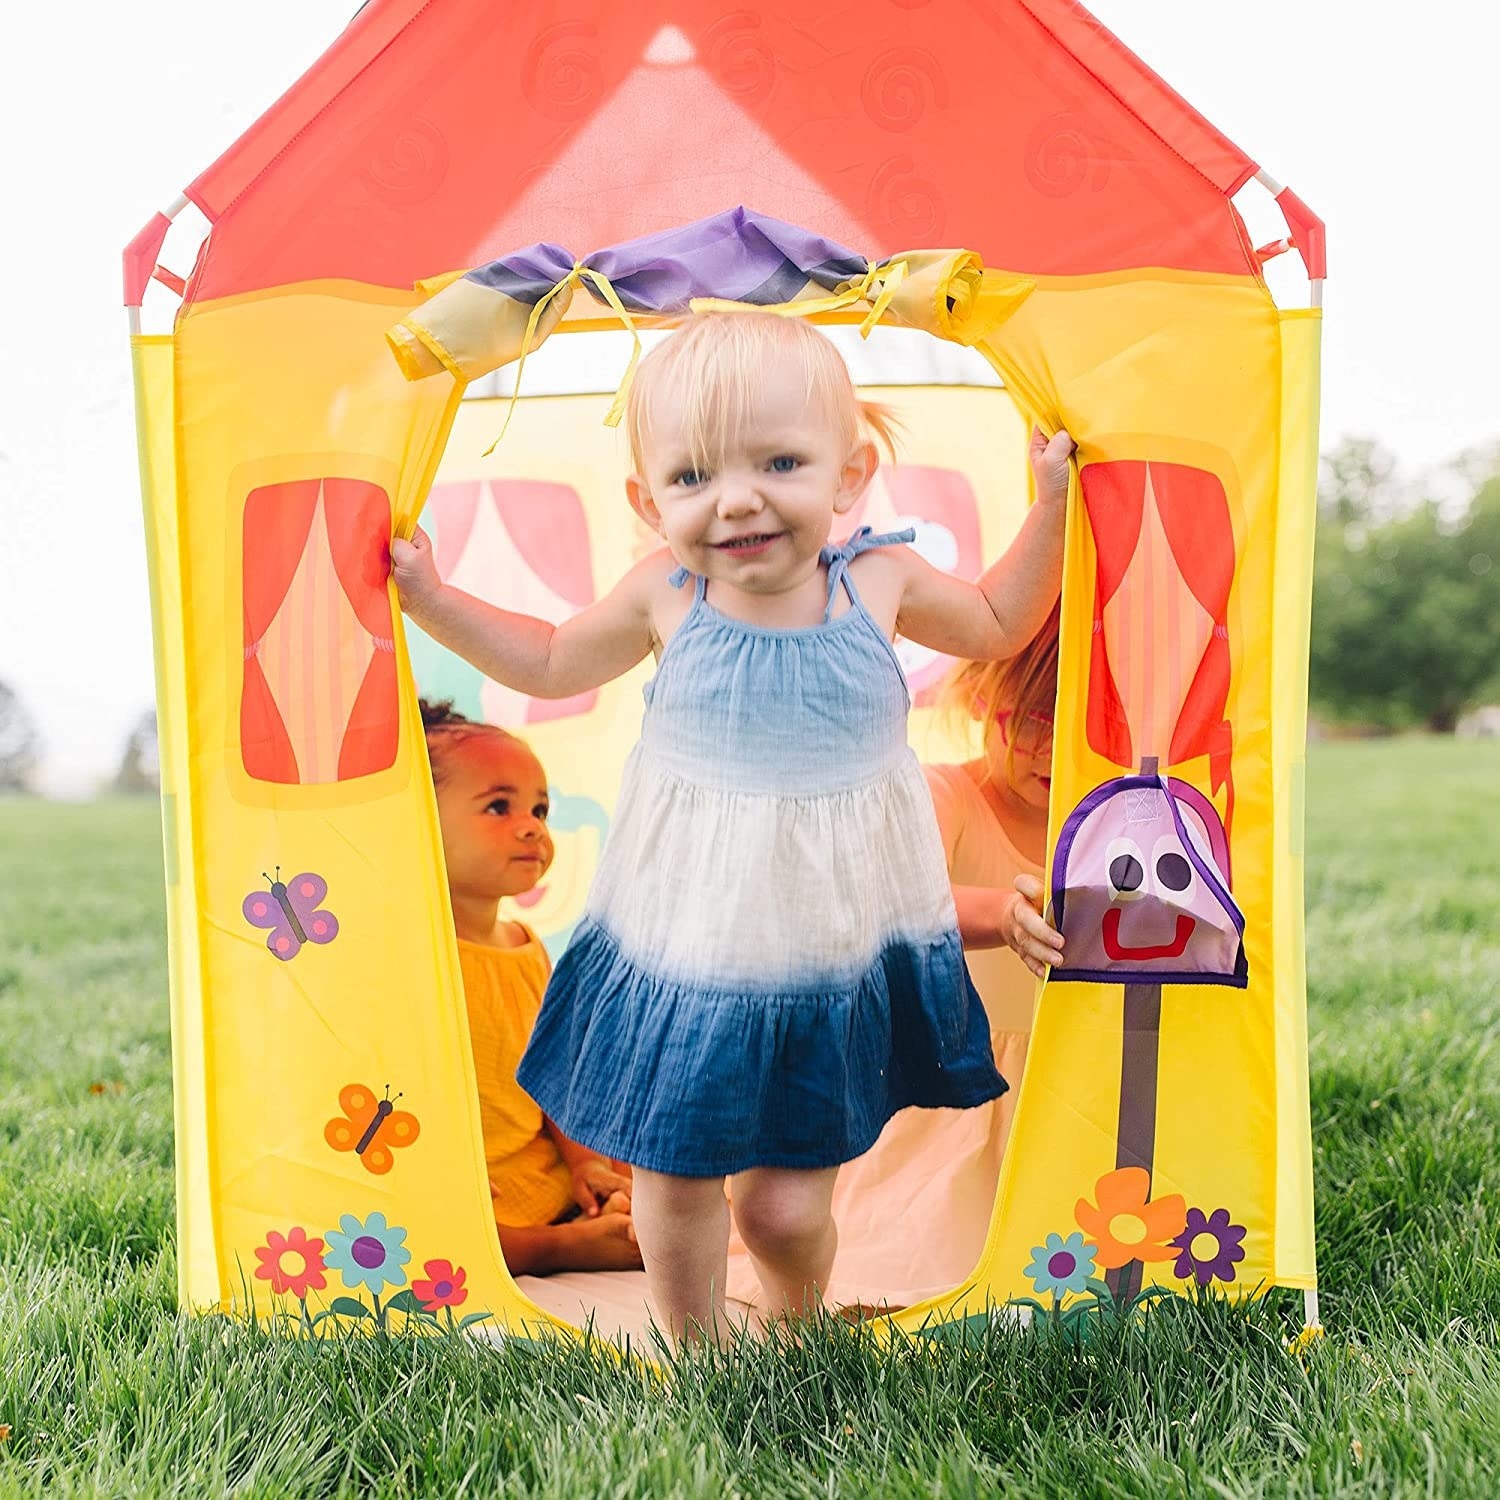 A small child in front of a colourful tent